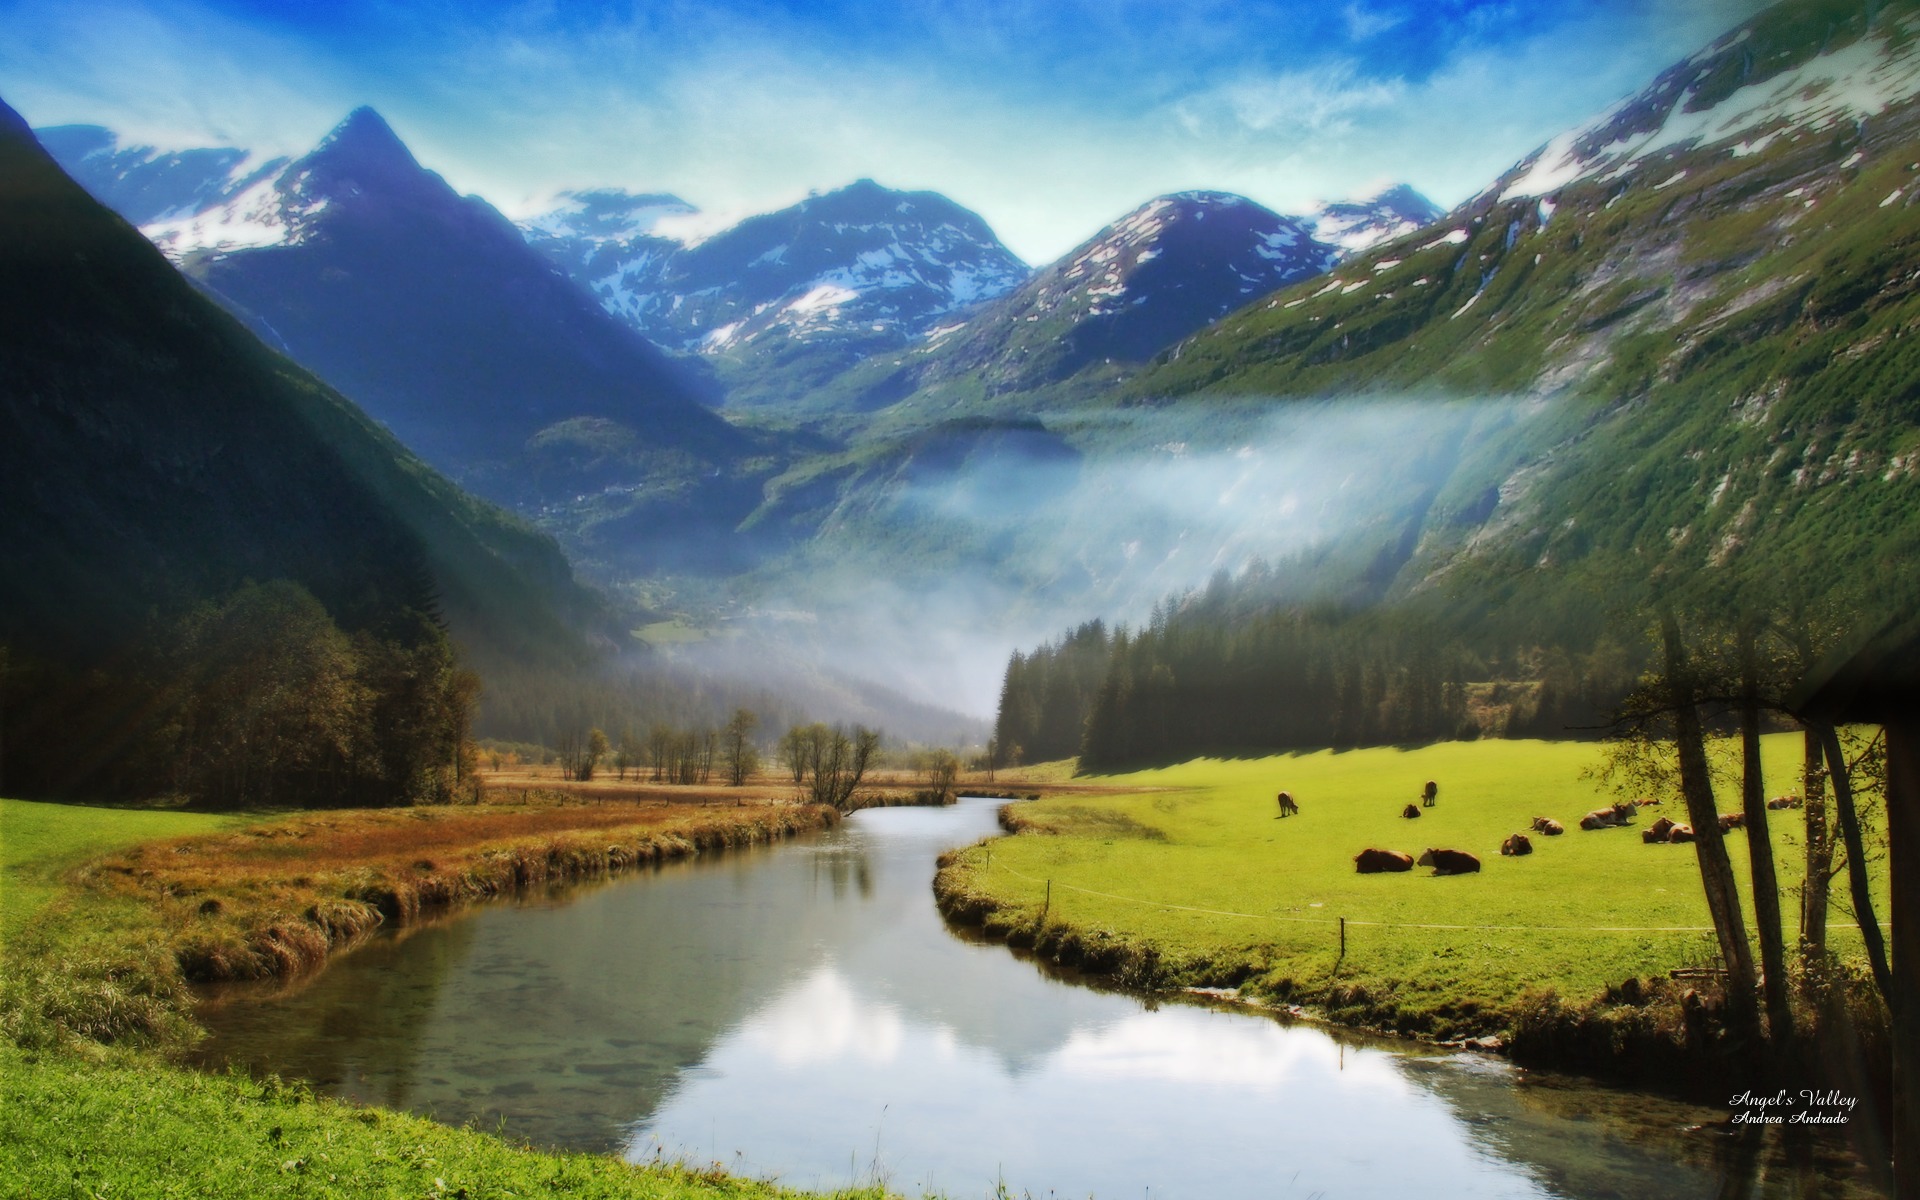 Wallpaper Nature Widescreen Manipulated Photo Valley